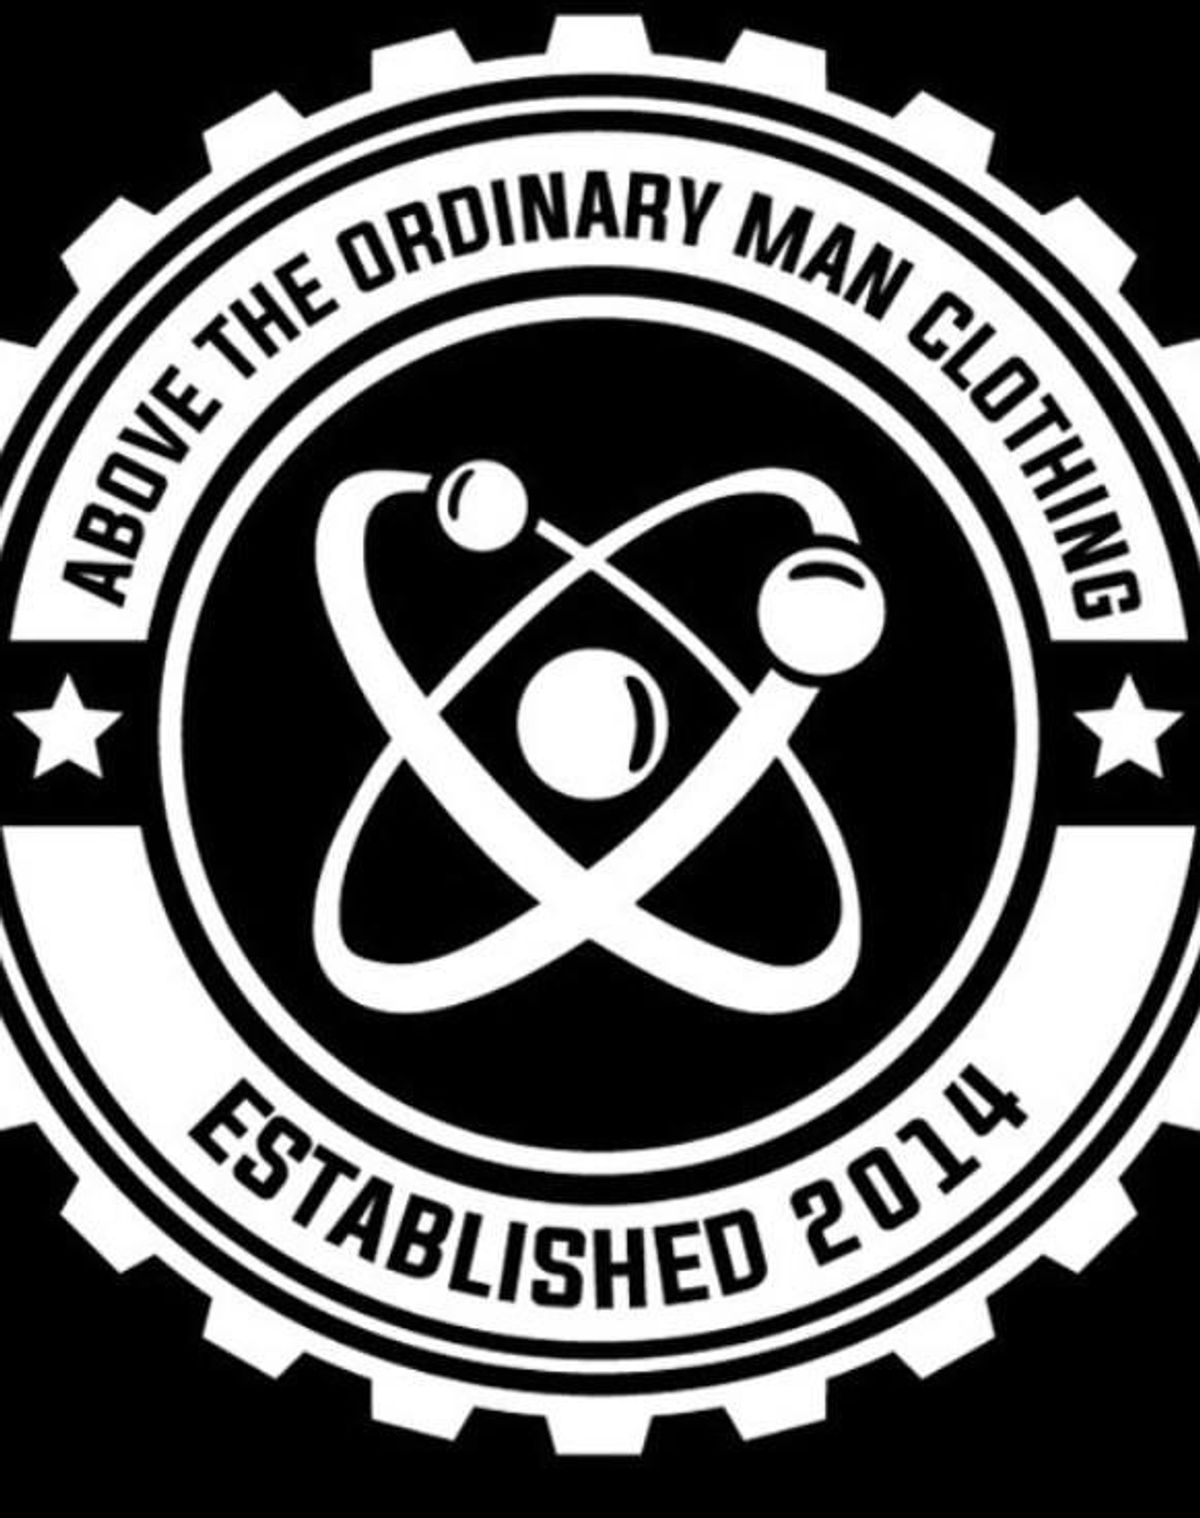 Above The Ordinary Man Apparel: A Brand That Inspires